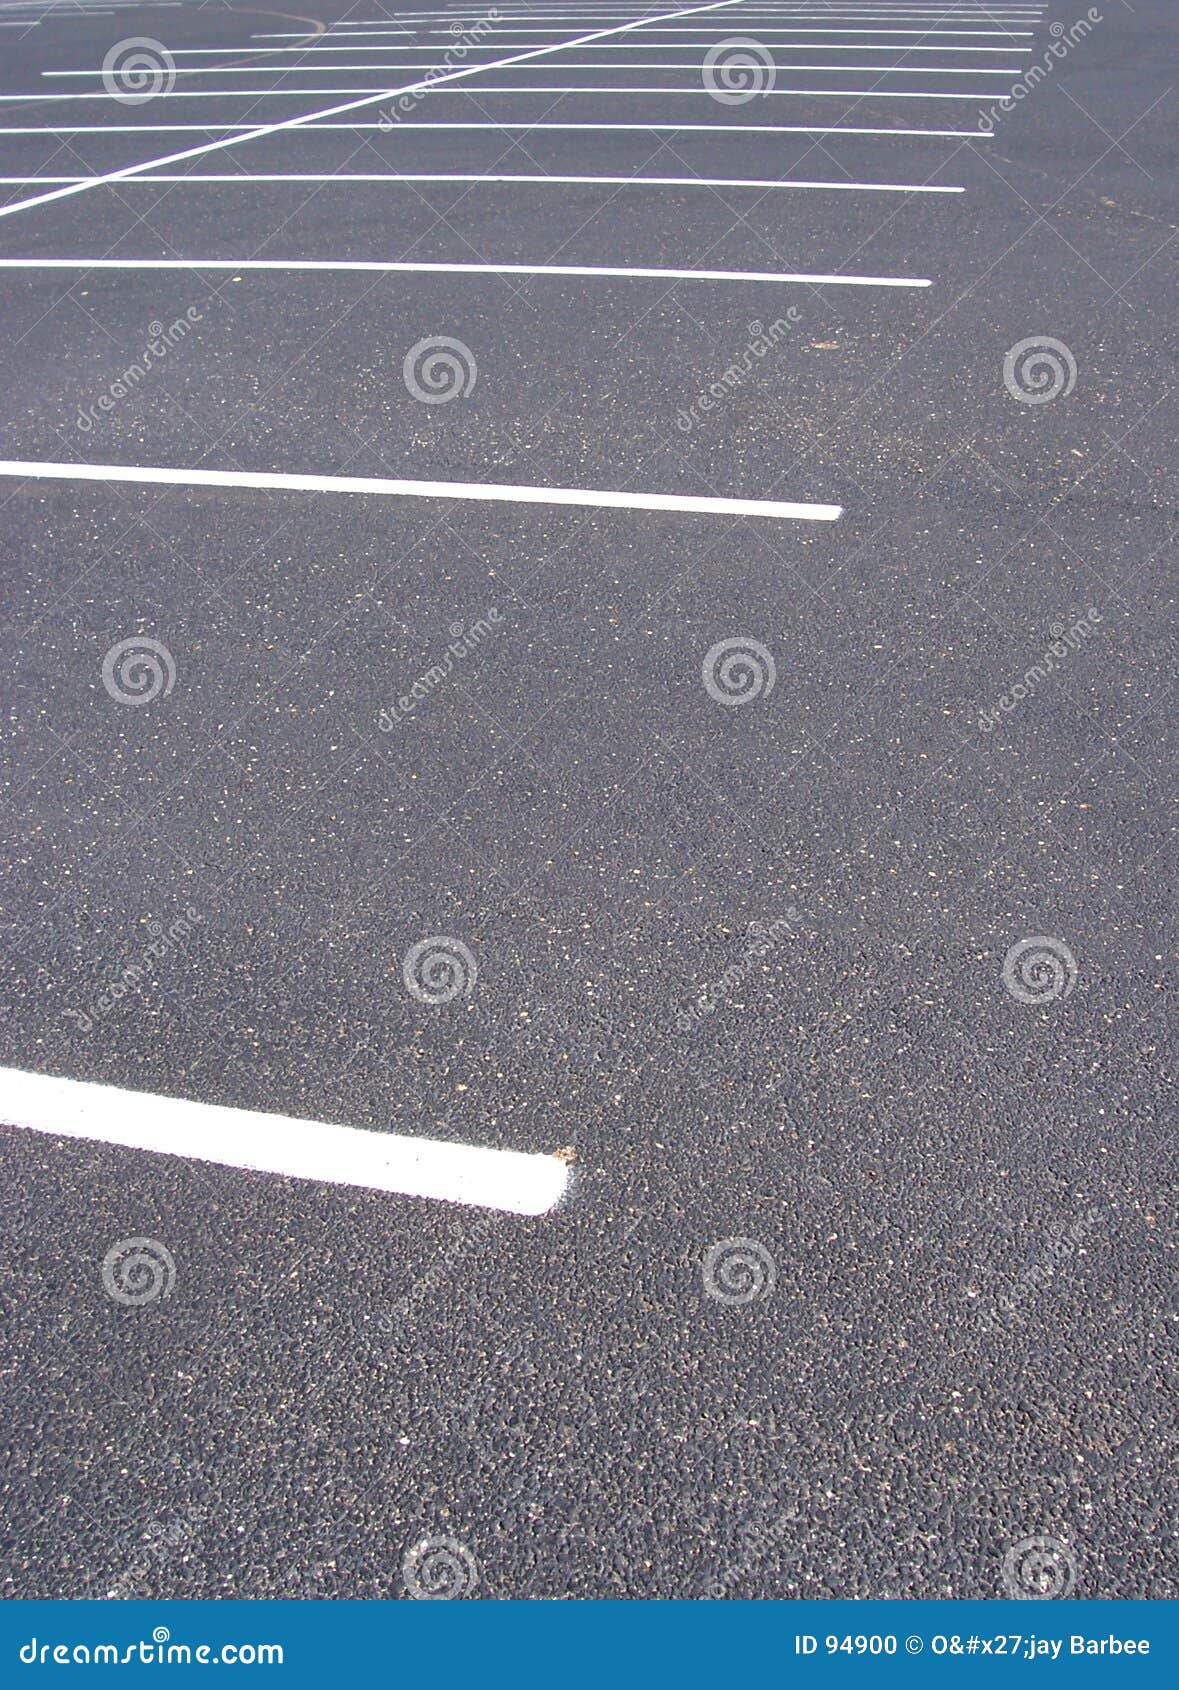 spaces in parking lot